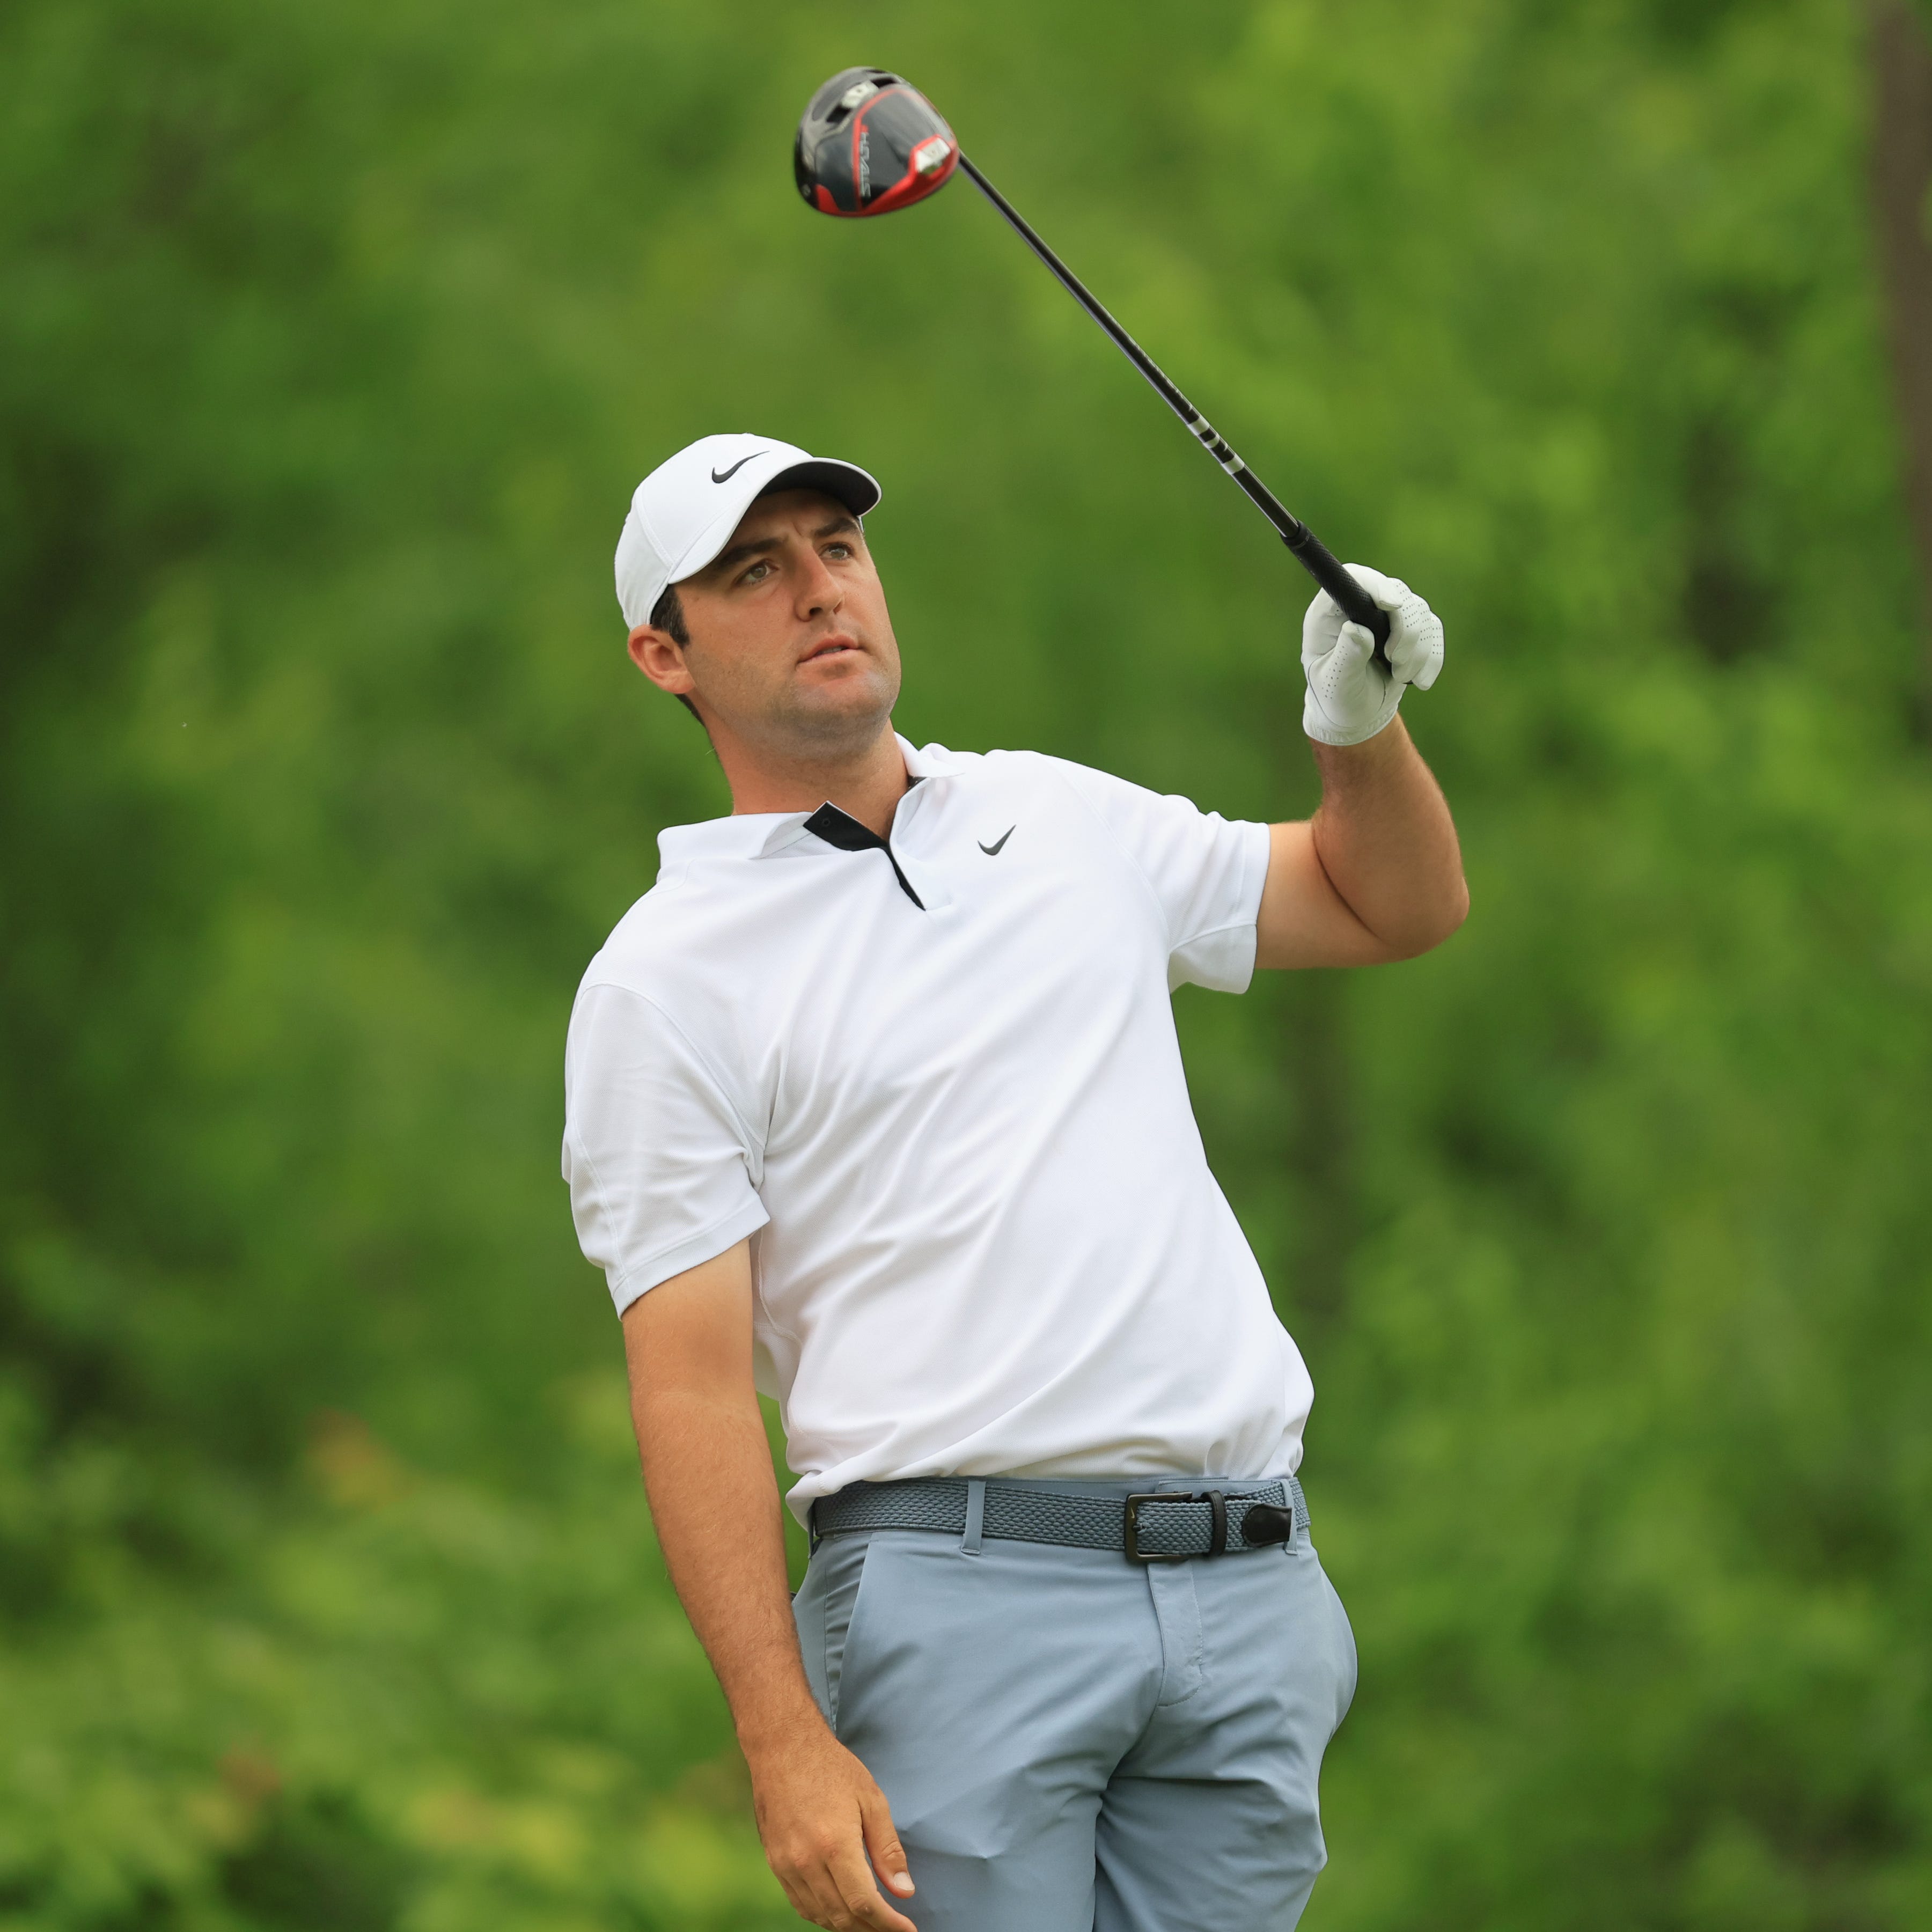 Scottie Scheffler is tied for the lead entering the weekend at the PGA Championship.